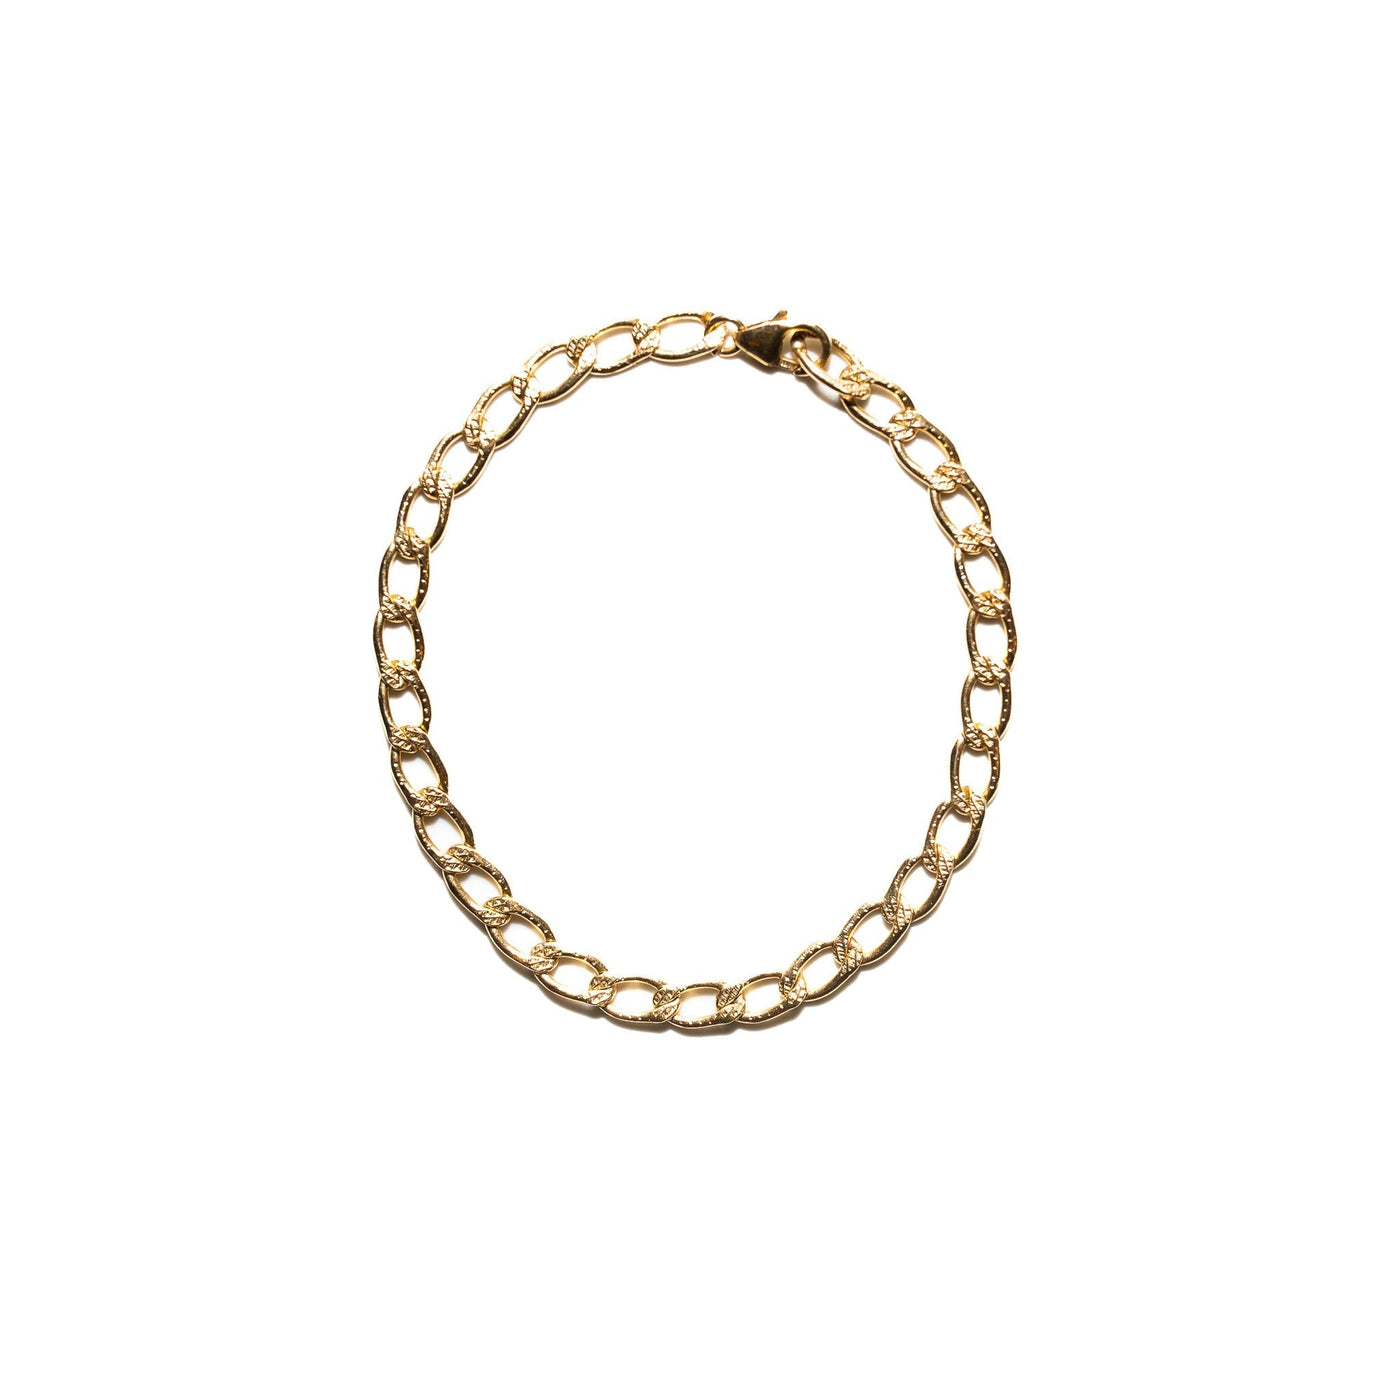 14K Yellow Gold Filled Paperclip Bracelet 04.